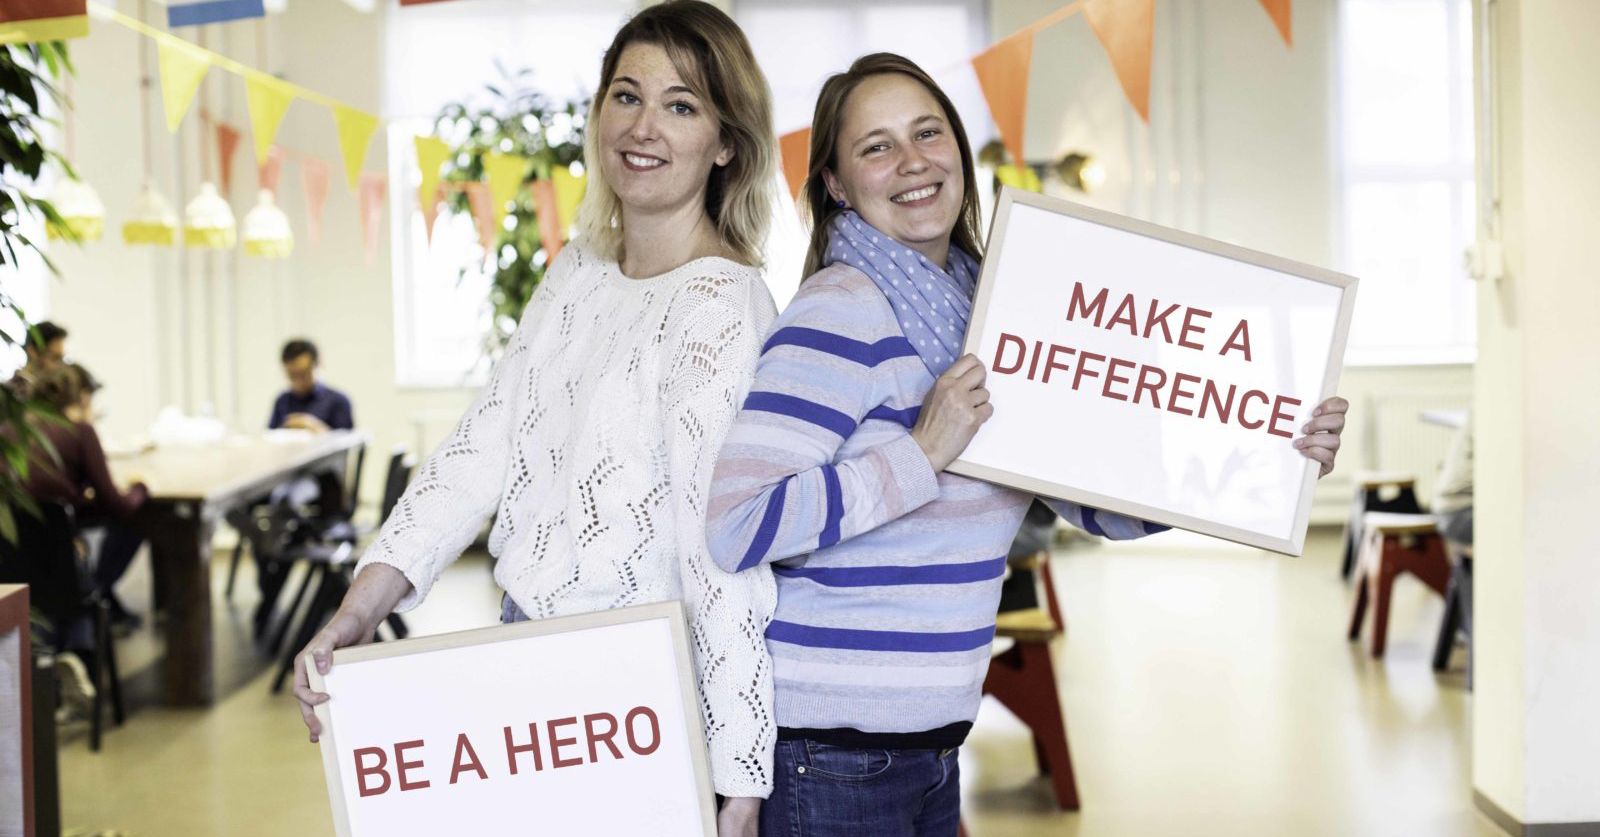 Heroes of the Week: “We’re a Hero family and we have such power to make an impact”